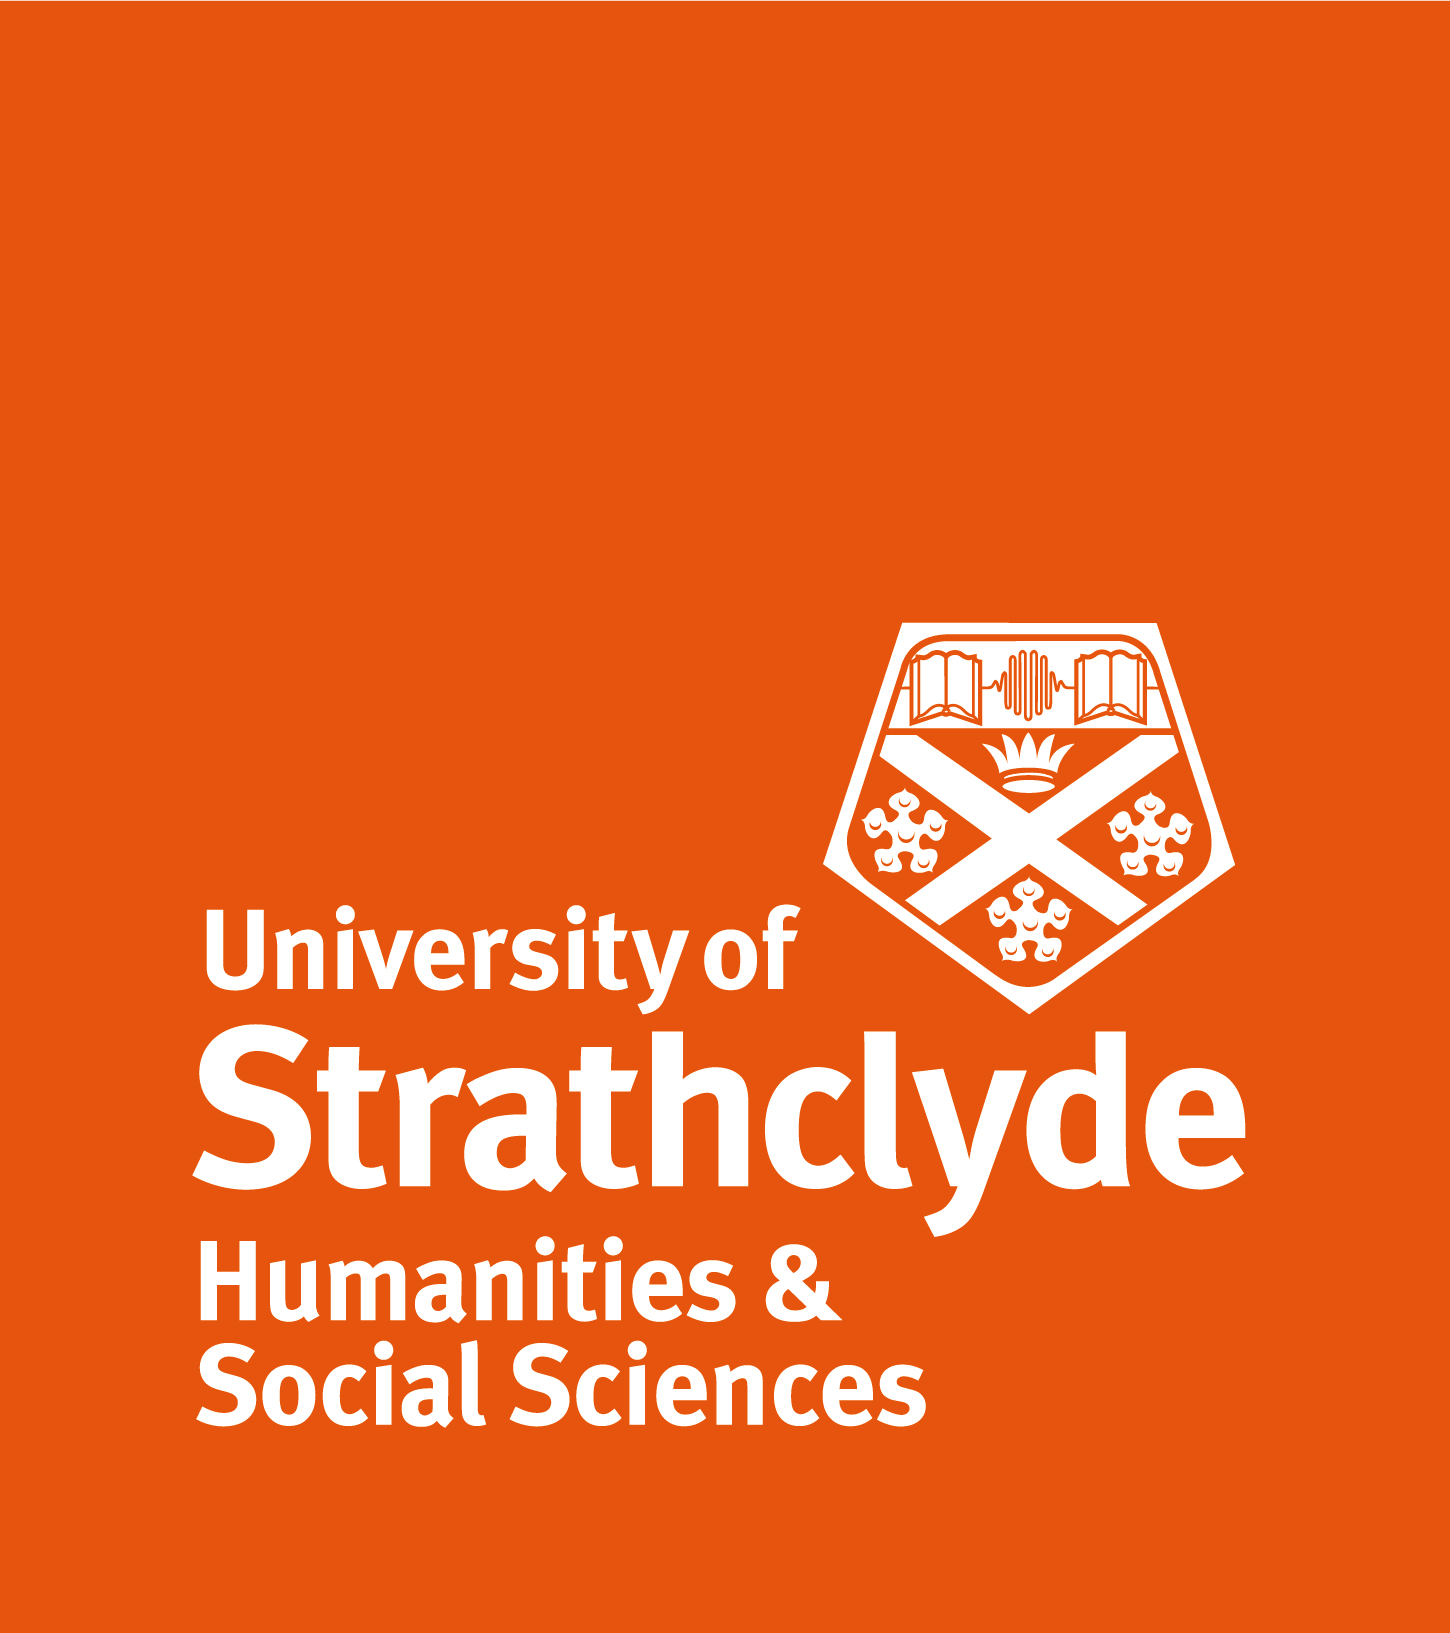 Orange background with university logo and Strathclyde Humanities & Social Sciences in white text